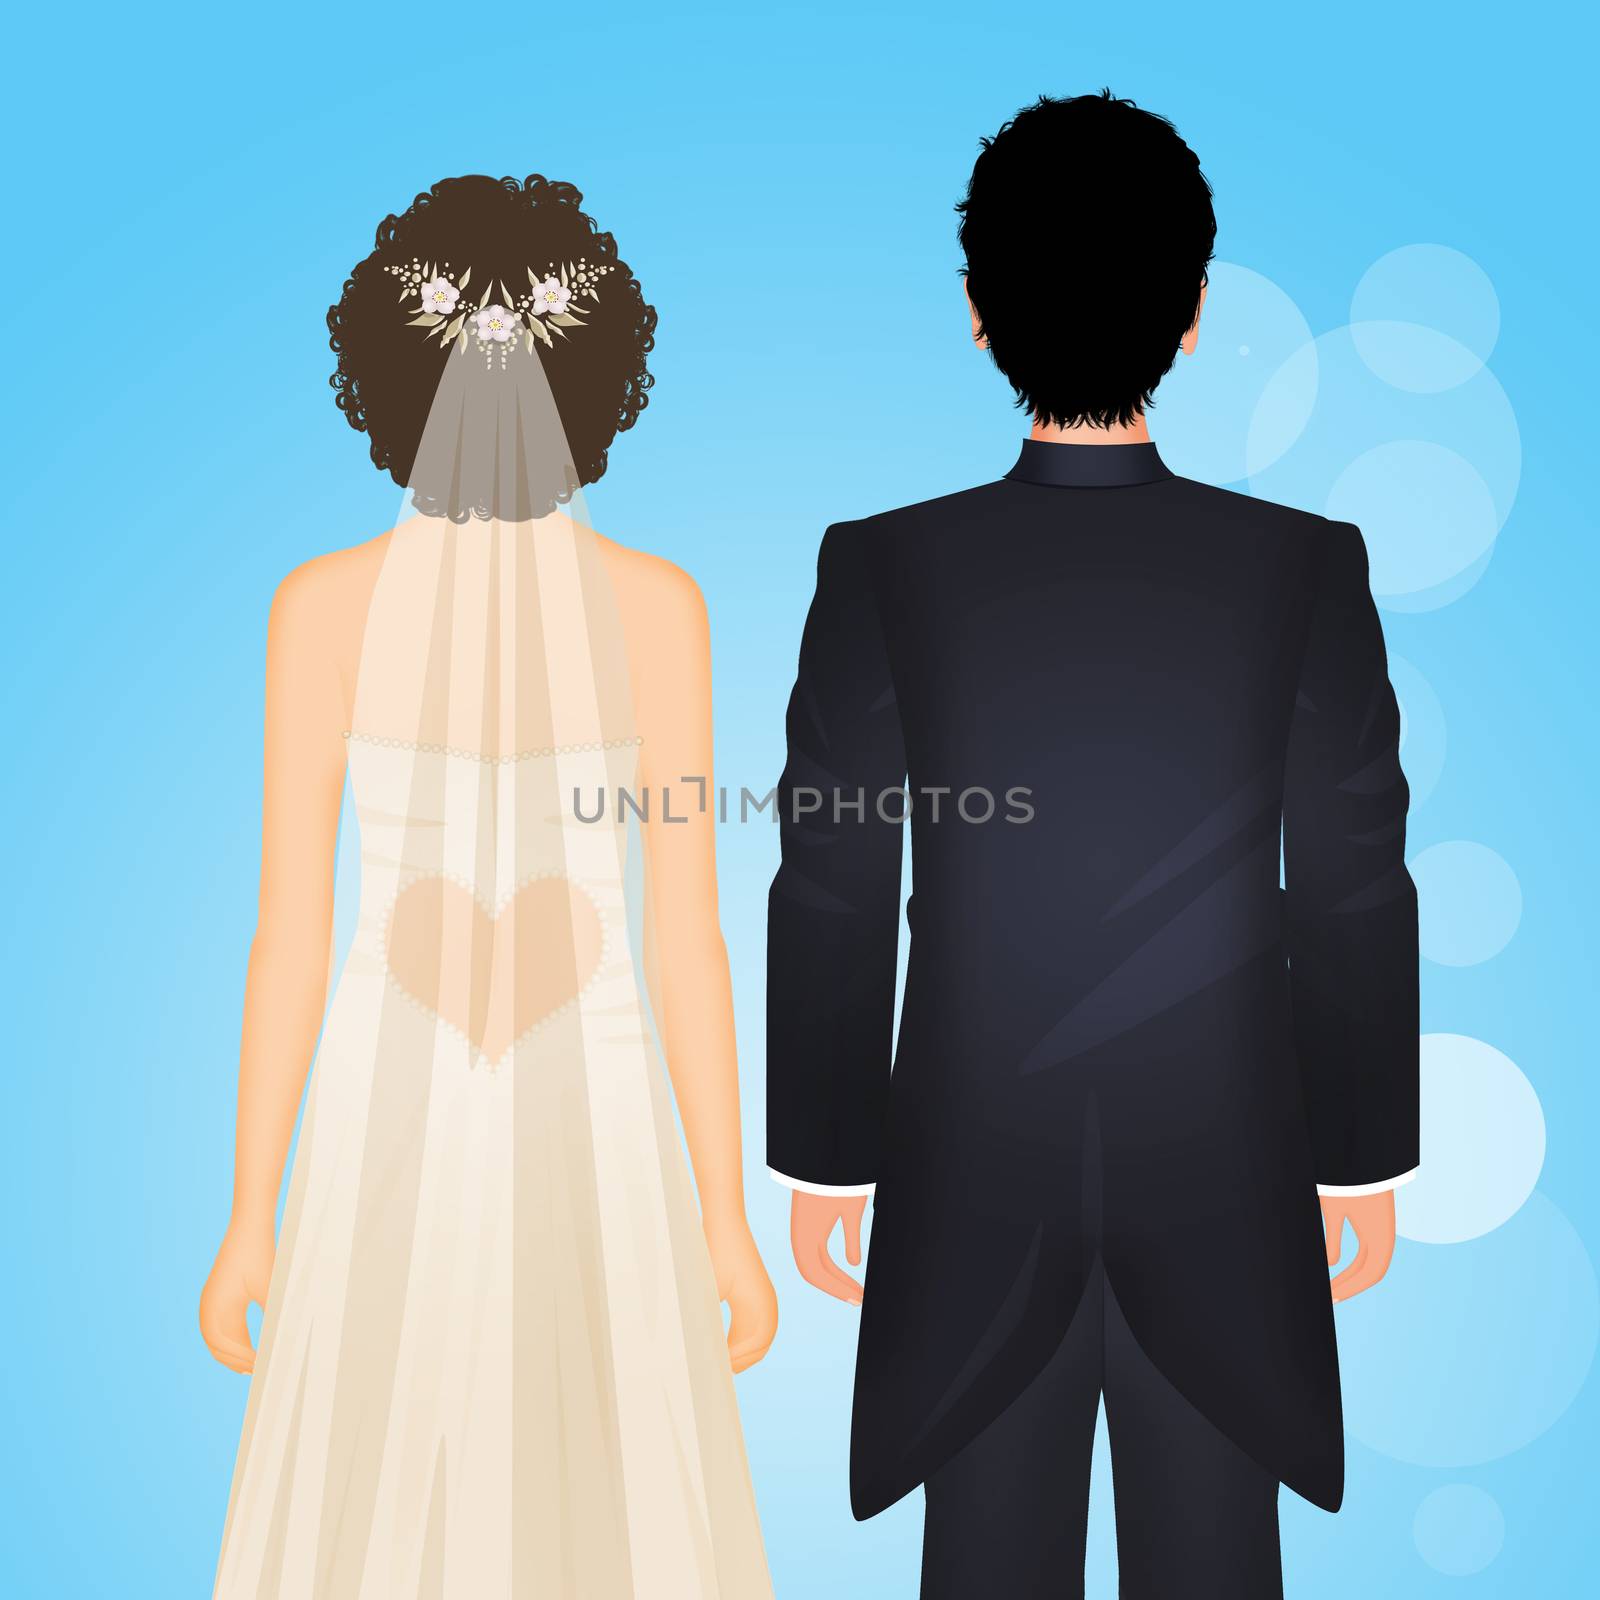 illustration of the spouses